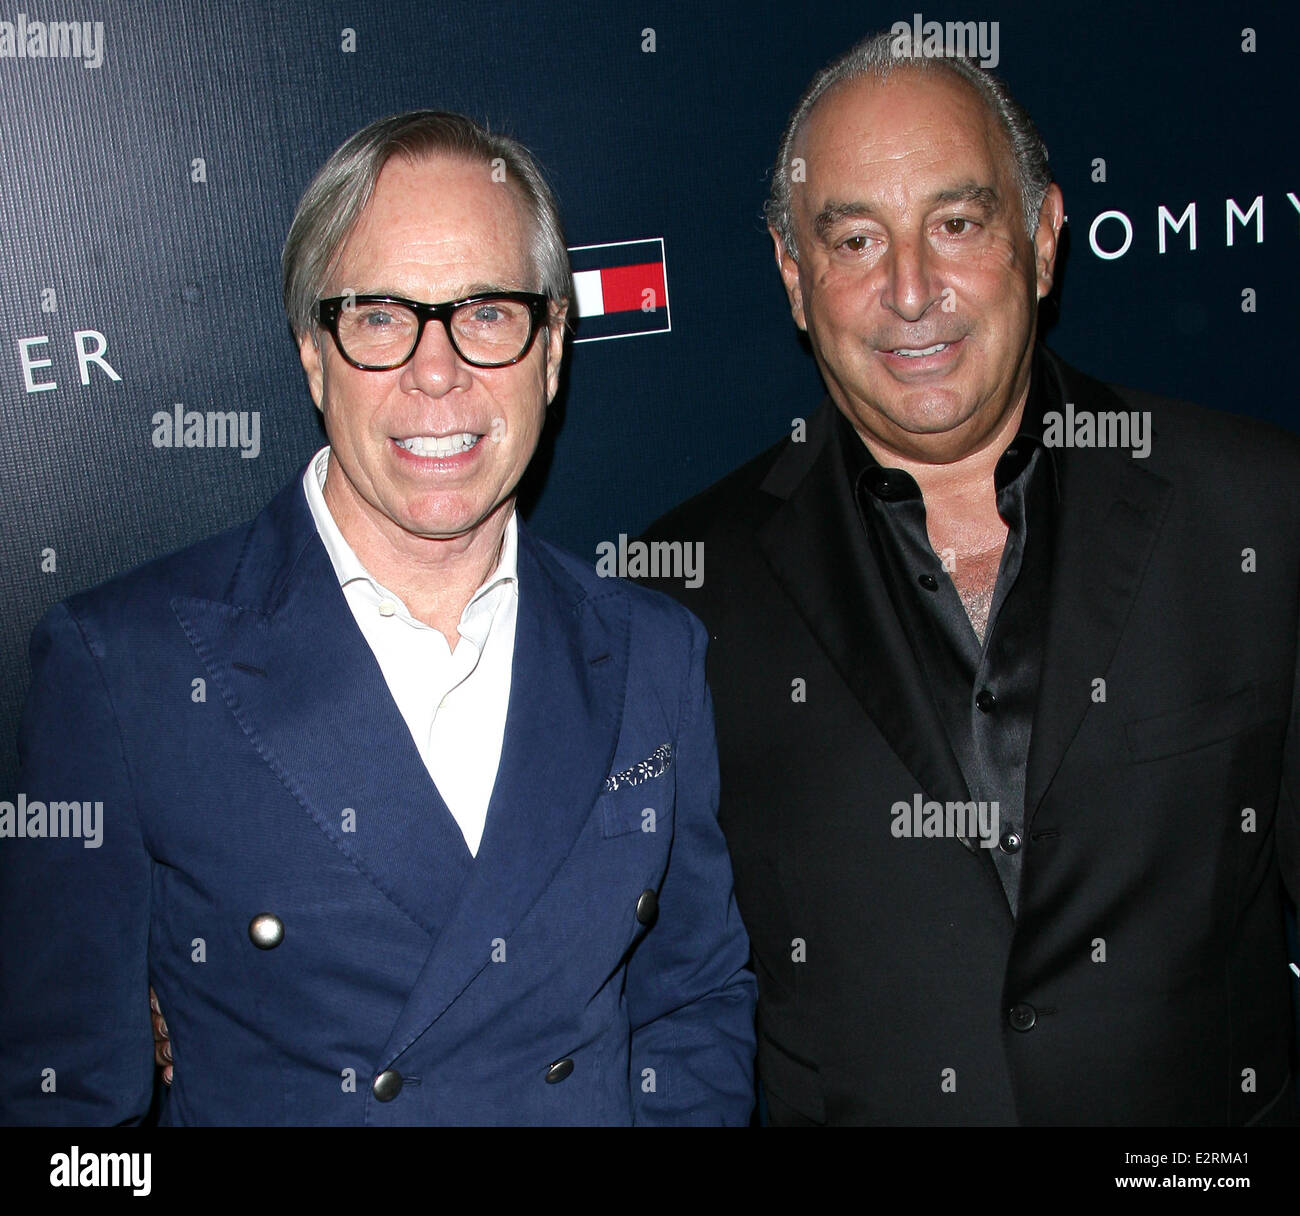 Party to celebrate the opening of the new Tommy Hilfiger West Coast  Flagship store on Robertson Boulevard Featuring: Tommy Hilfiger,Sir Philip  Green Where: West Hollywood, California, United States When: 13 Feb 2013